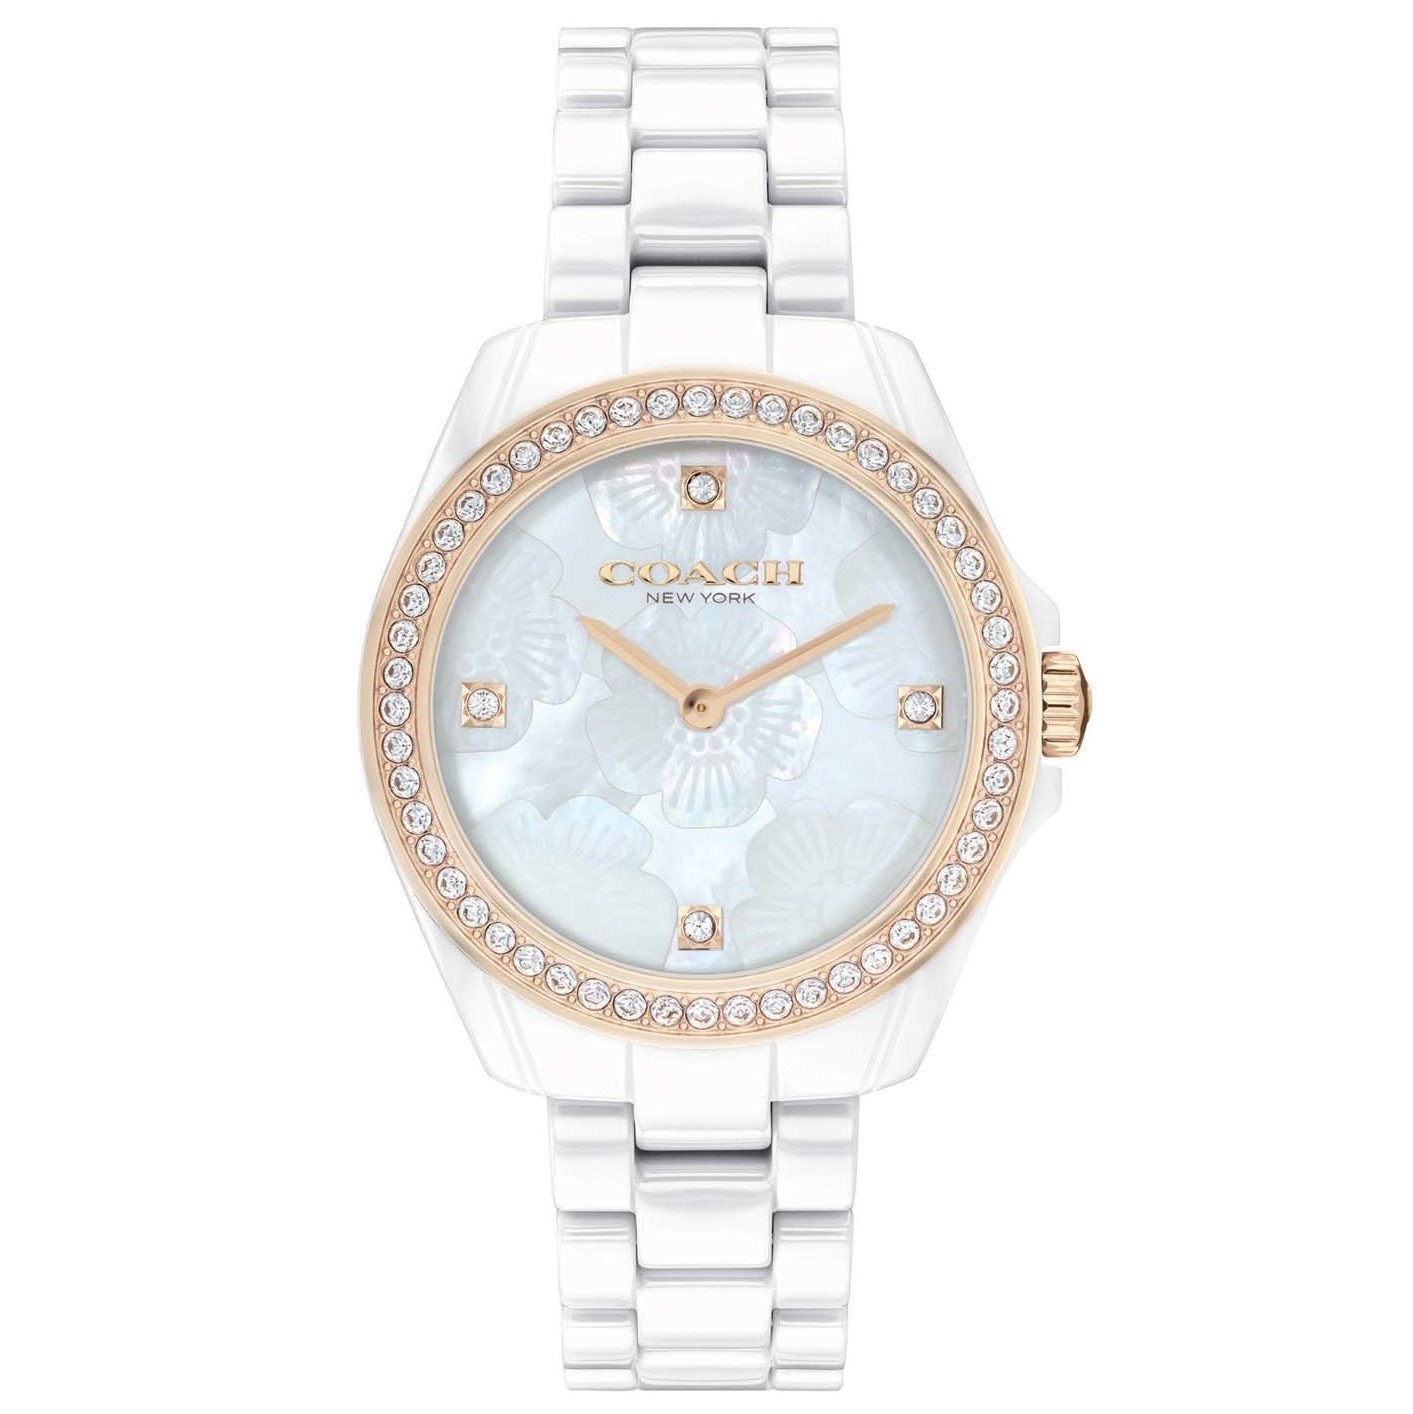 ĐỒNG HỒ COACH WOMENS 33.25 MM PRESTON MOTHER OF PEARL DIAL STAINLESS STEEL ANALOGUE WATCH 2